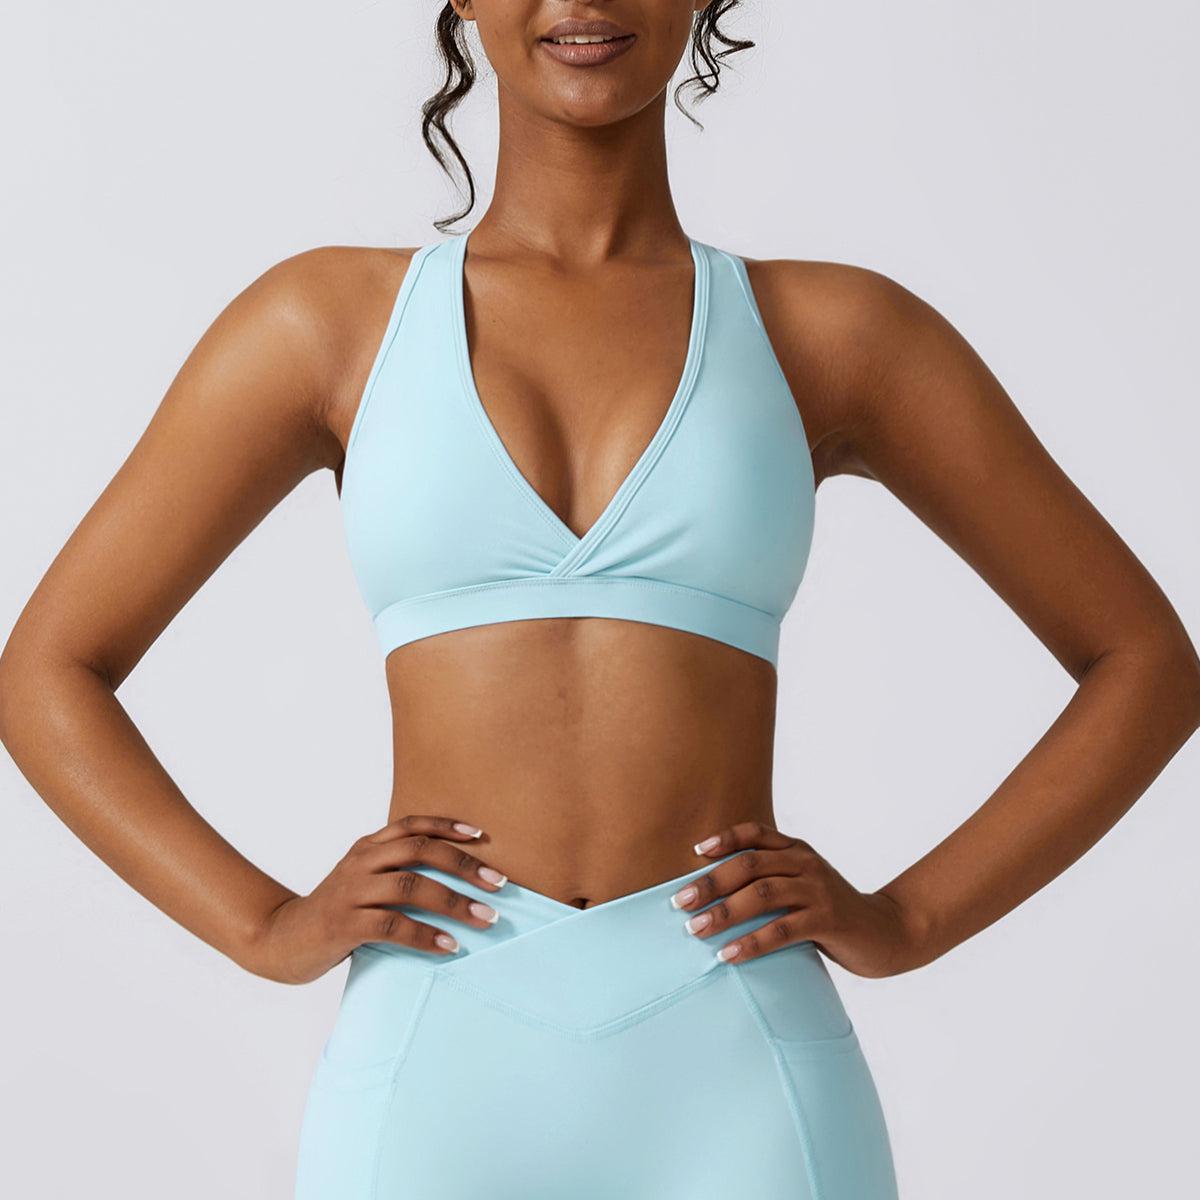 a woman in a light blue sports bra top with her hands on her hips